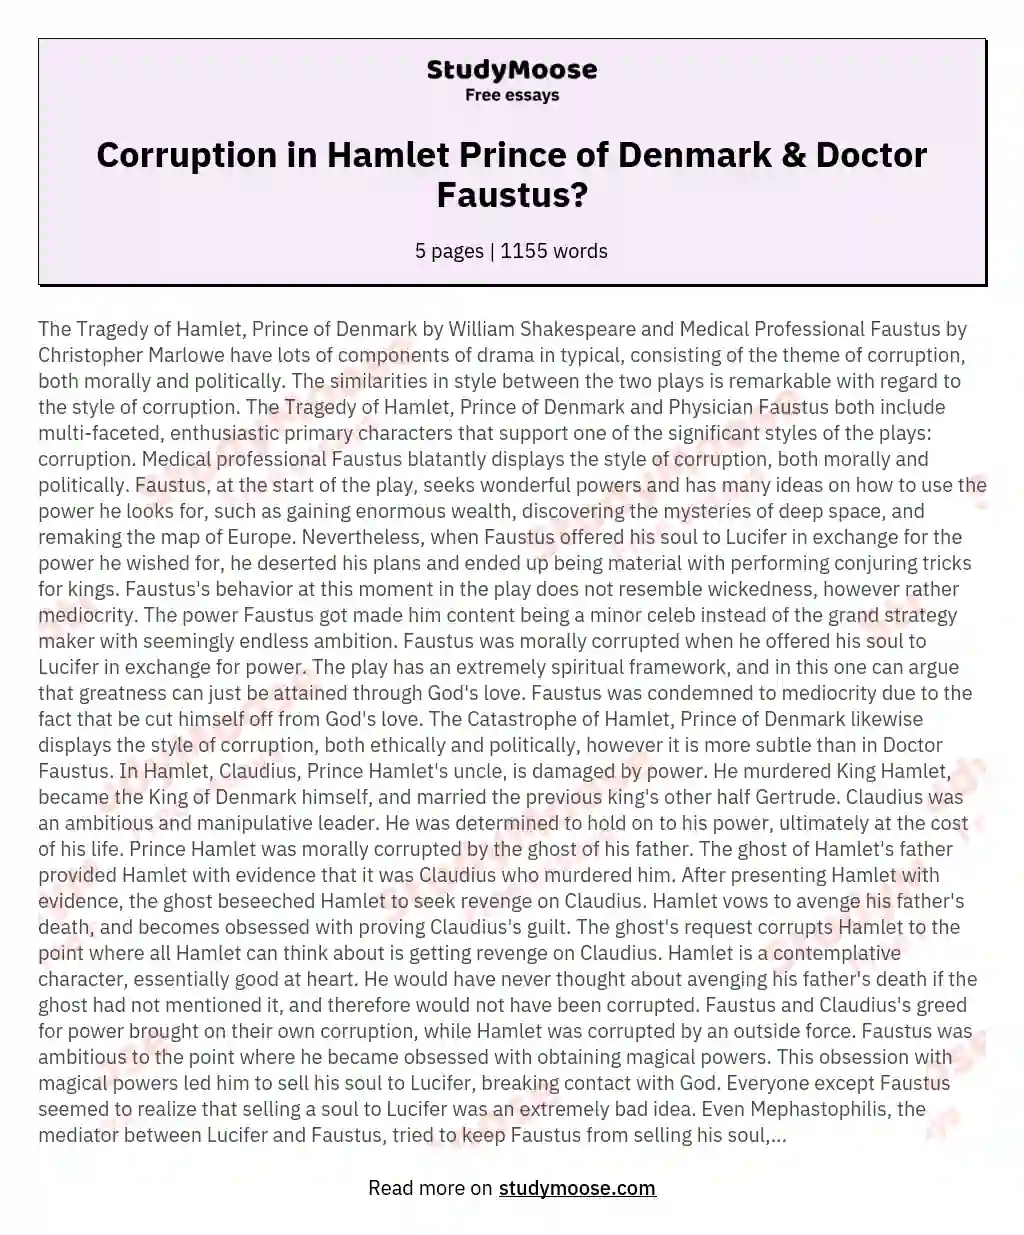 The Theme of Corruption in The Tragedy of Hamlet, Prince of Denmark and Doctor Faustus